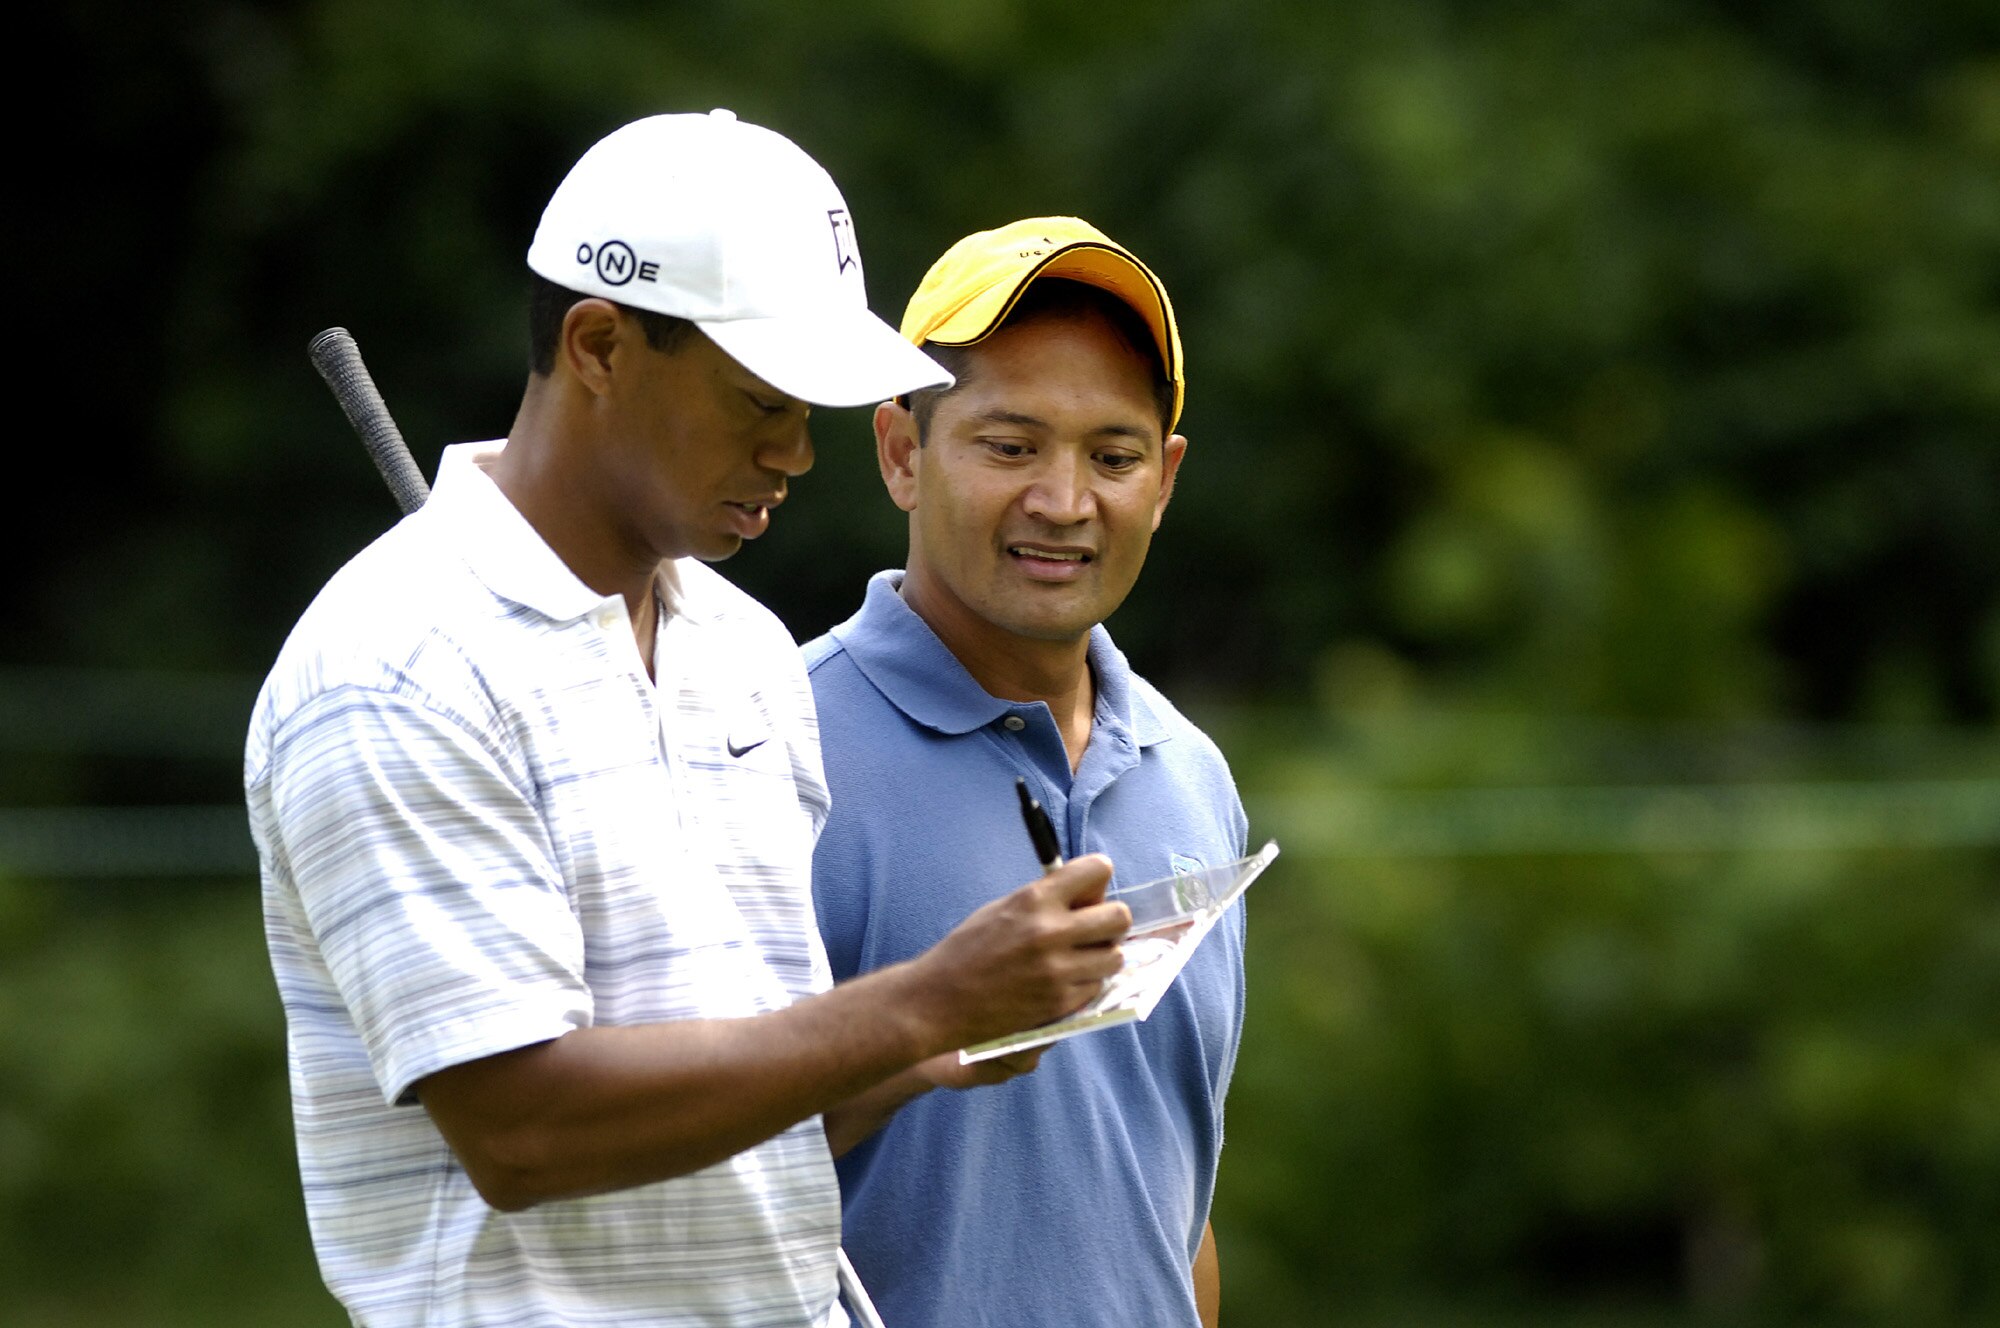 Tech. Sgt. Andy Amor, 316th Civil Engineer Squadron, Andrews Air Force Base, Md., watches as professional golfer Tiger Woods signs an autograph during their round at Congressional Country Club in Bethesda, Md., July 4. Sergeant Amor was selected to represent the Air Force in the pro-am event before the start of the AT&T National Golf Tournament at Congressional. Tiger Woods was the event host as well as a contestant and spokesman. (U.S. Air Force photo by Senior Airman Dan DeCook)